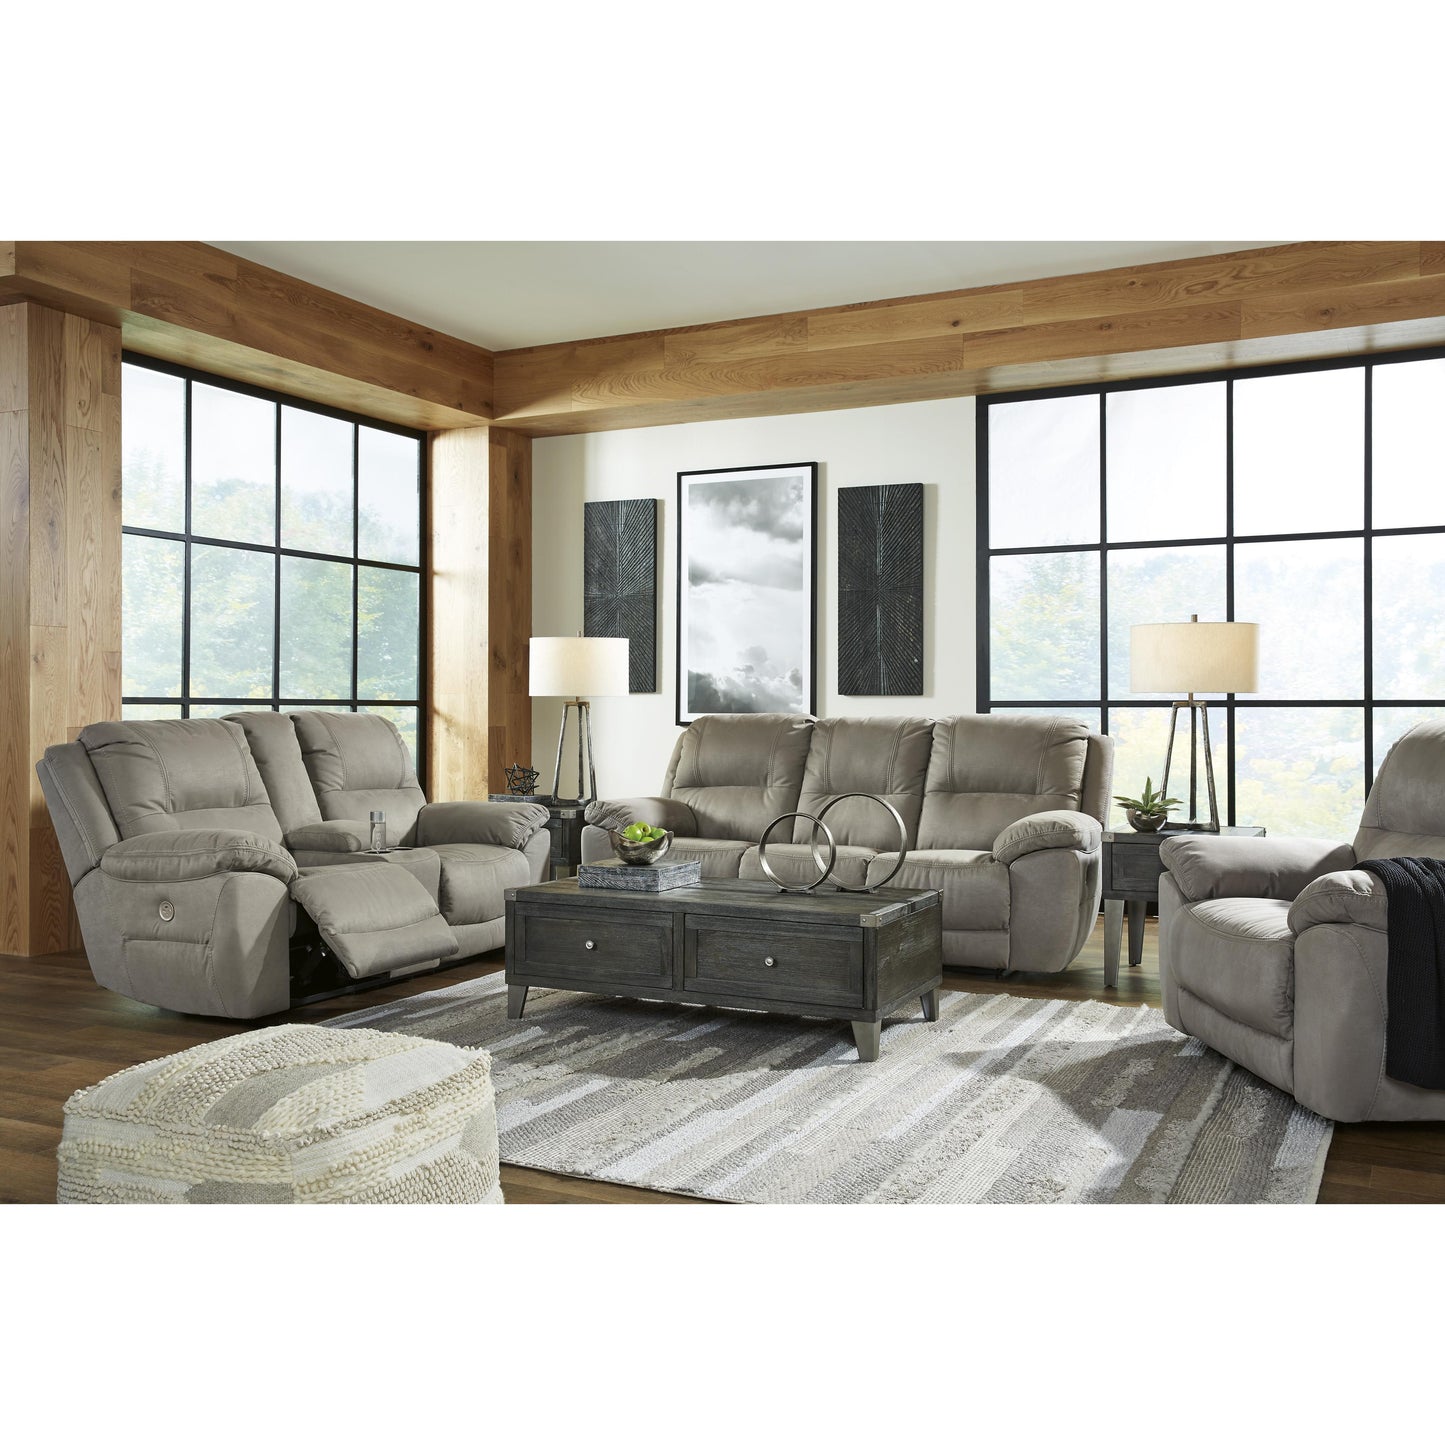 Signature Design by Ashley Next-Gen Gaucho Power Leather Look Recliner with Wall Recline 5420382 IMAGE 9